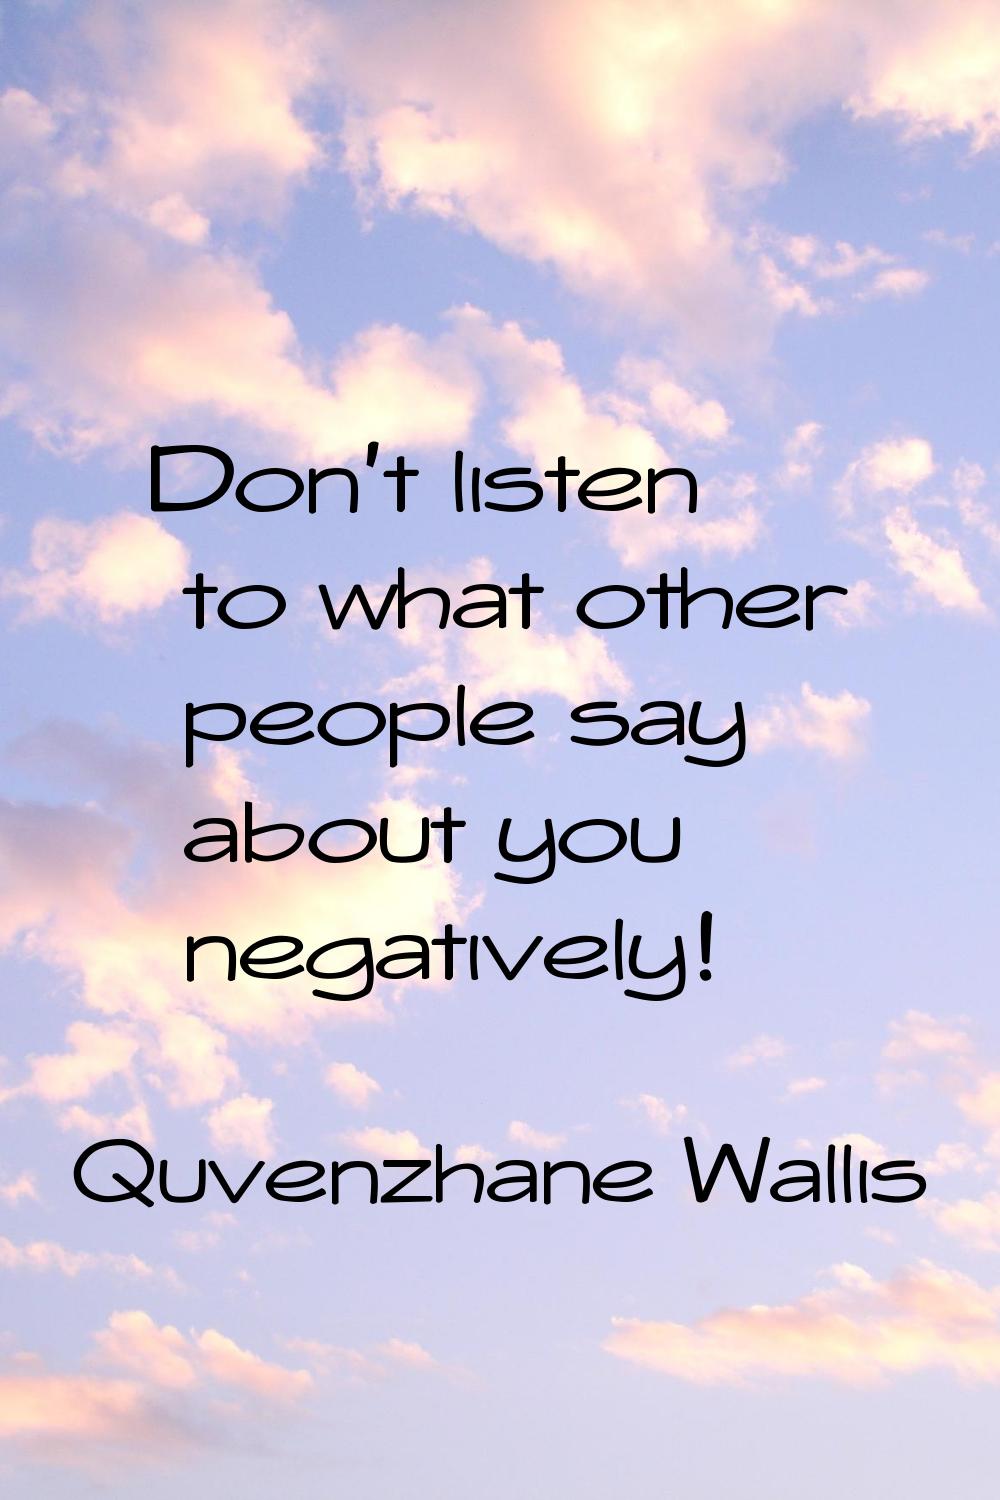 Don't listen to what other people say about you negatively!